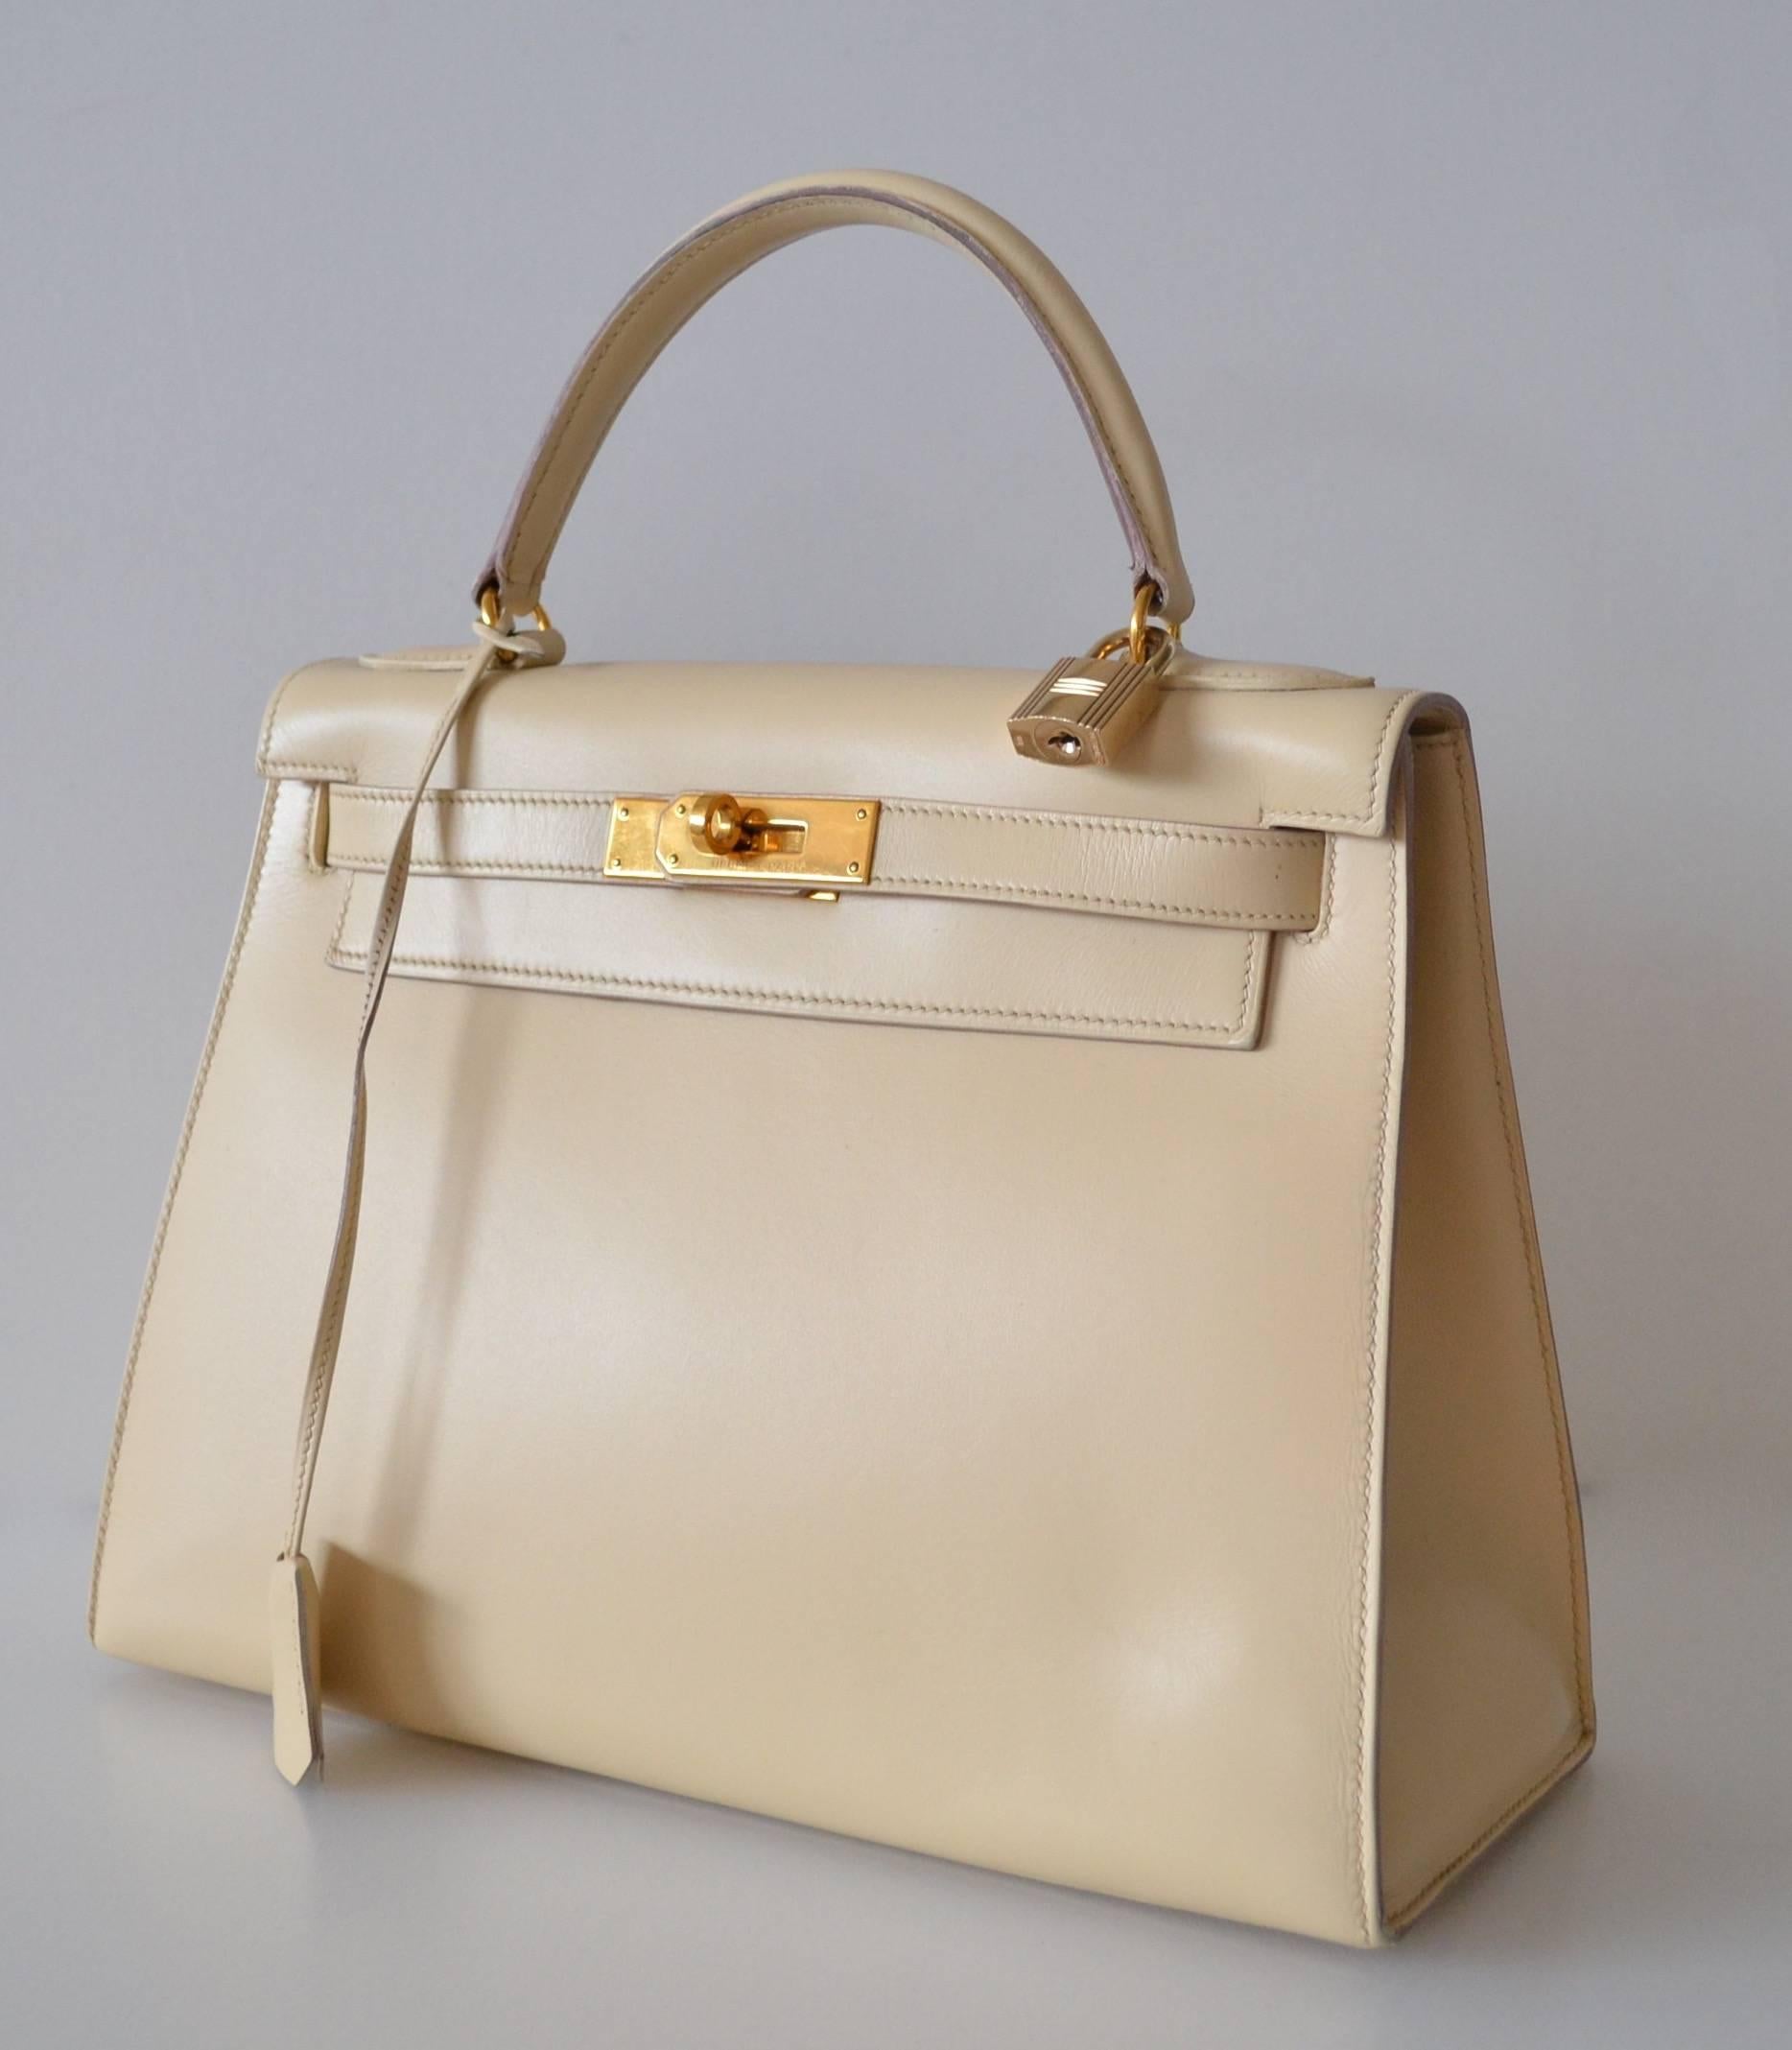 Hermès handbag Kelly 28 Sellier Coquille d’œuf Box
Very rare color 
Coquille d’œuf is for Eggshell with gold plated hardware
 
Very good condition
Box leather is in very good condition - Box was refurbished and polished.
Sellier has still its